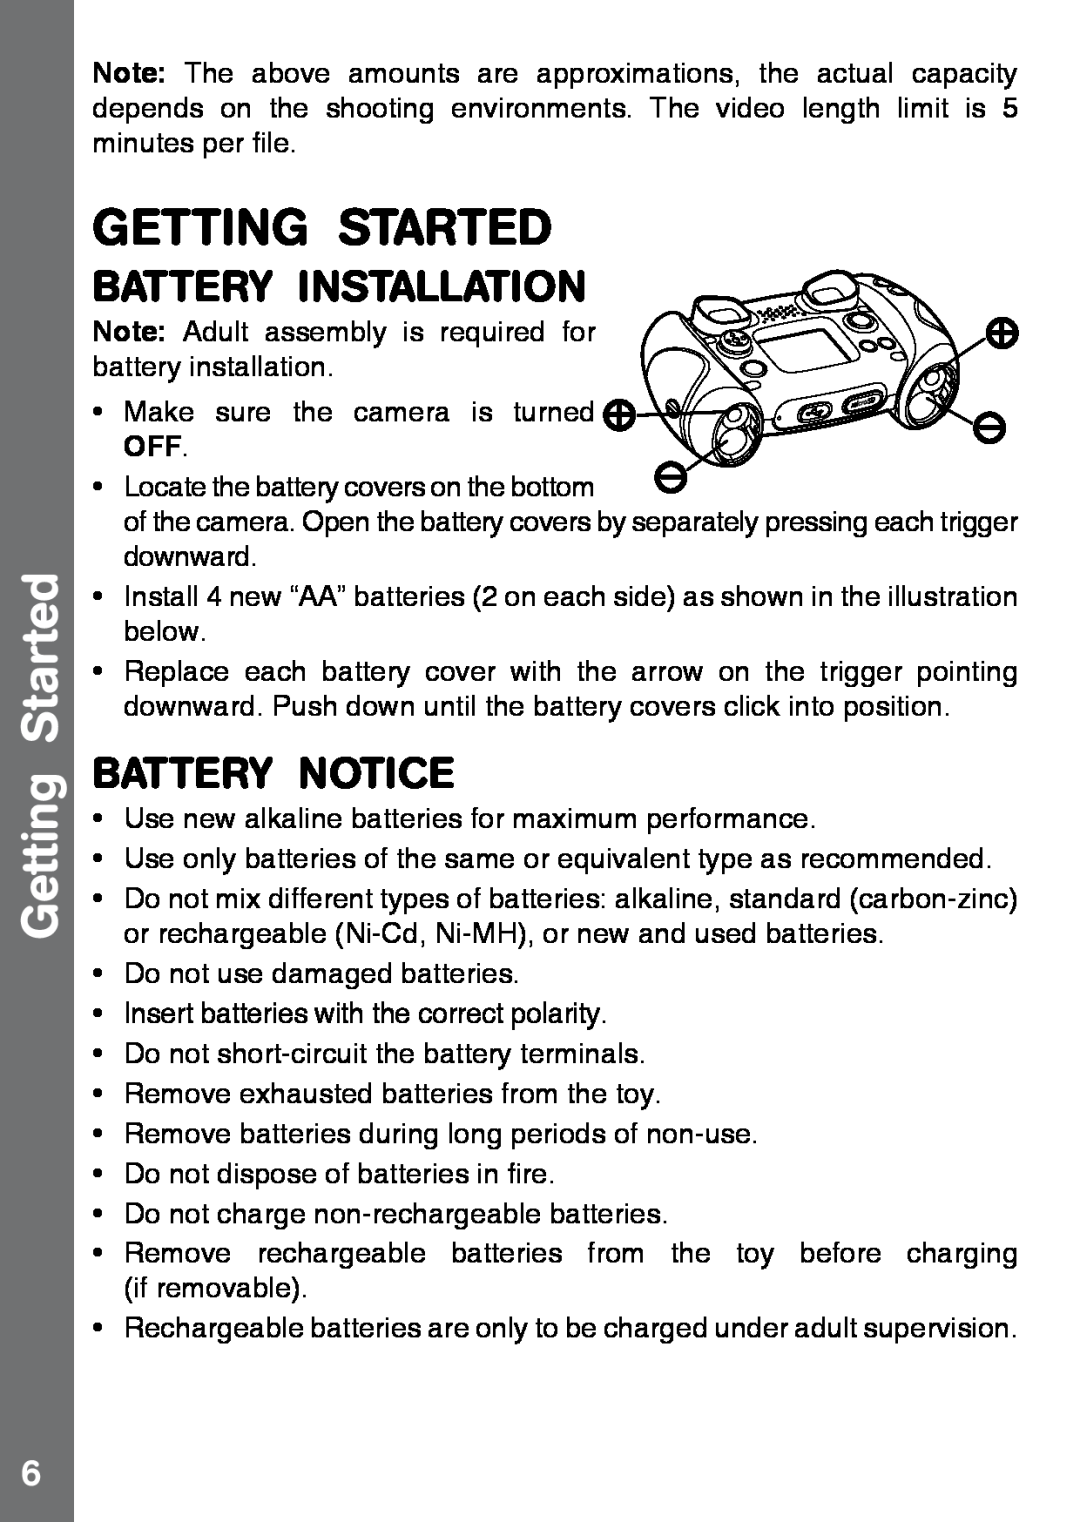 VTech 91-002843-000 user manual Getting Started, Battery Installation, Battery Notice 